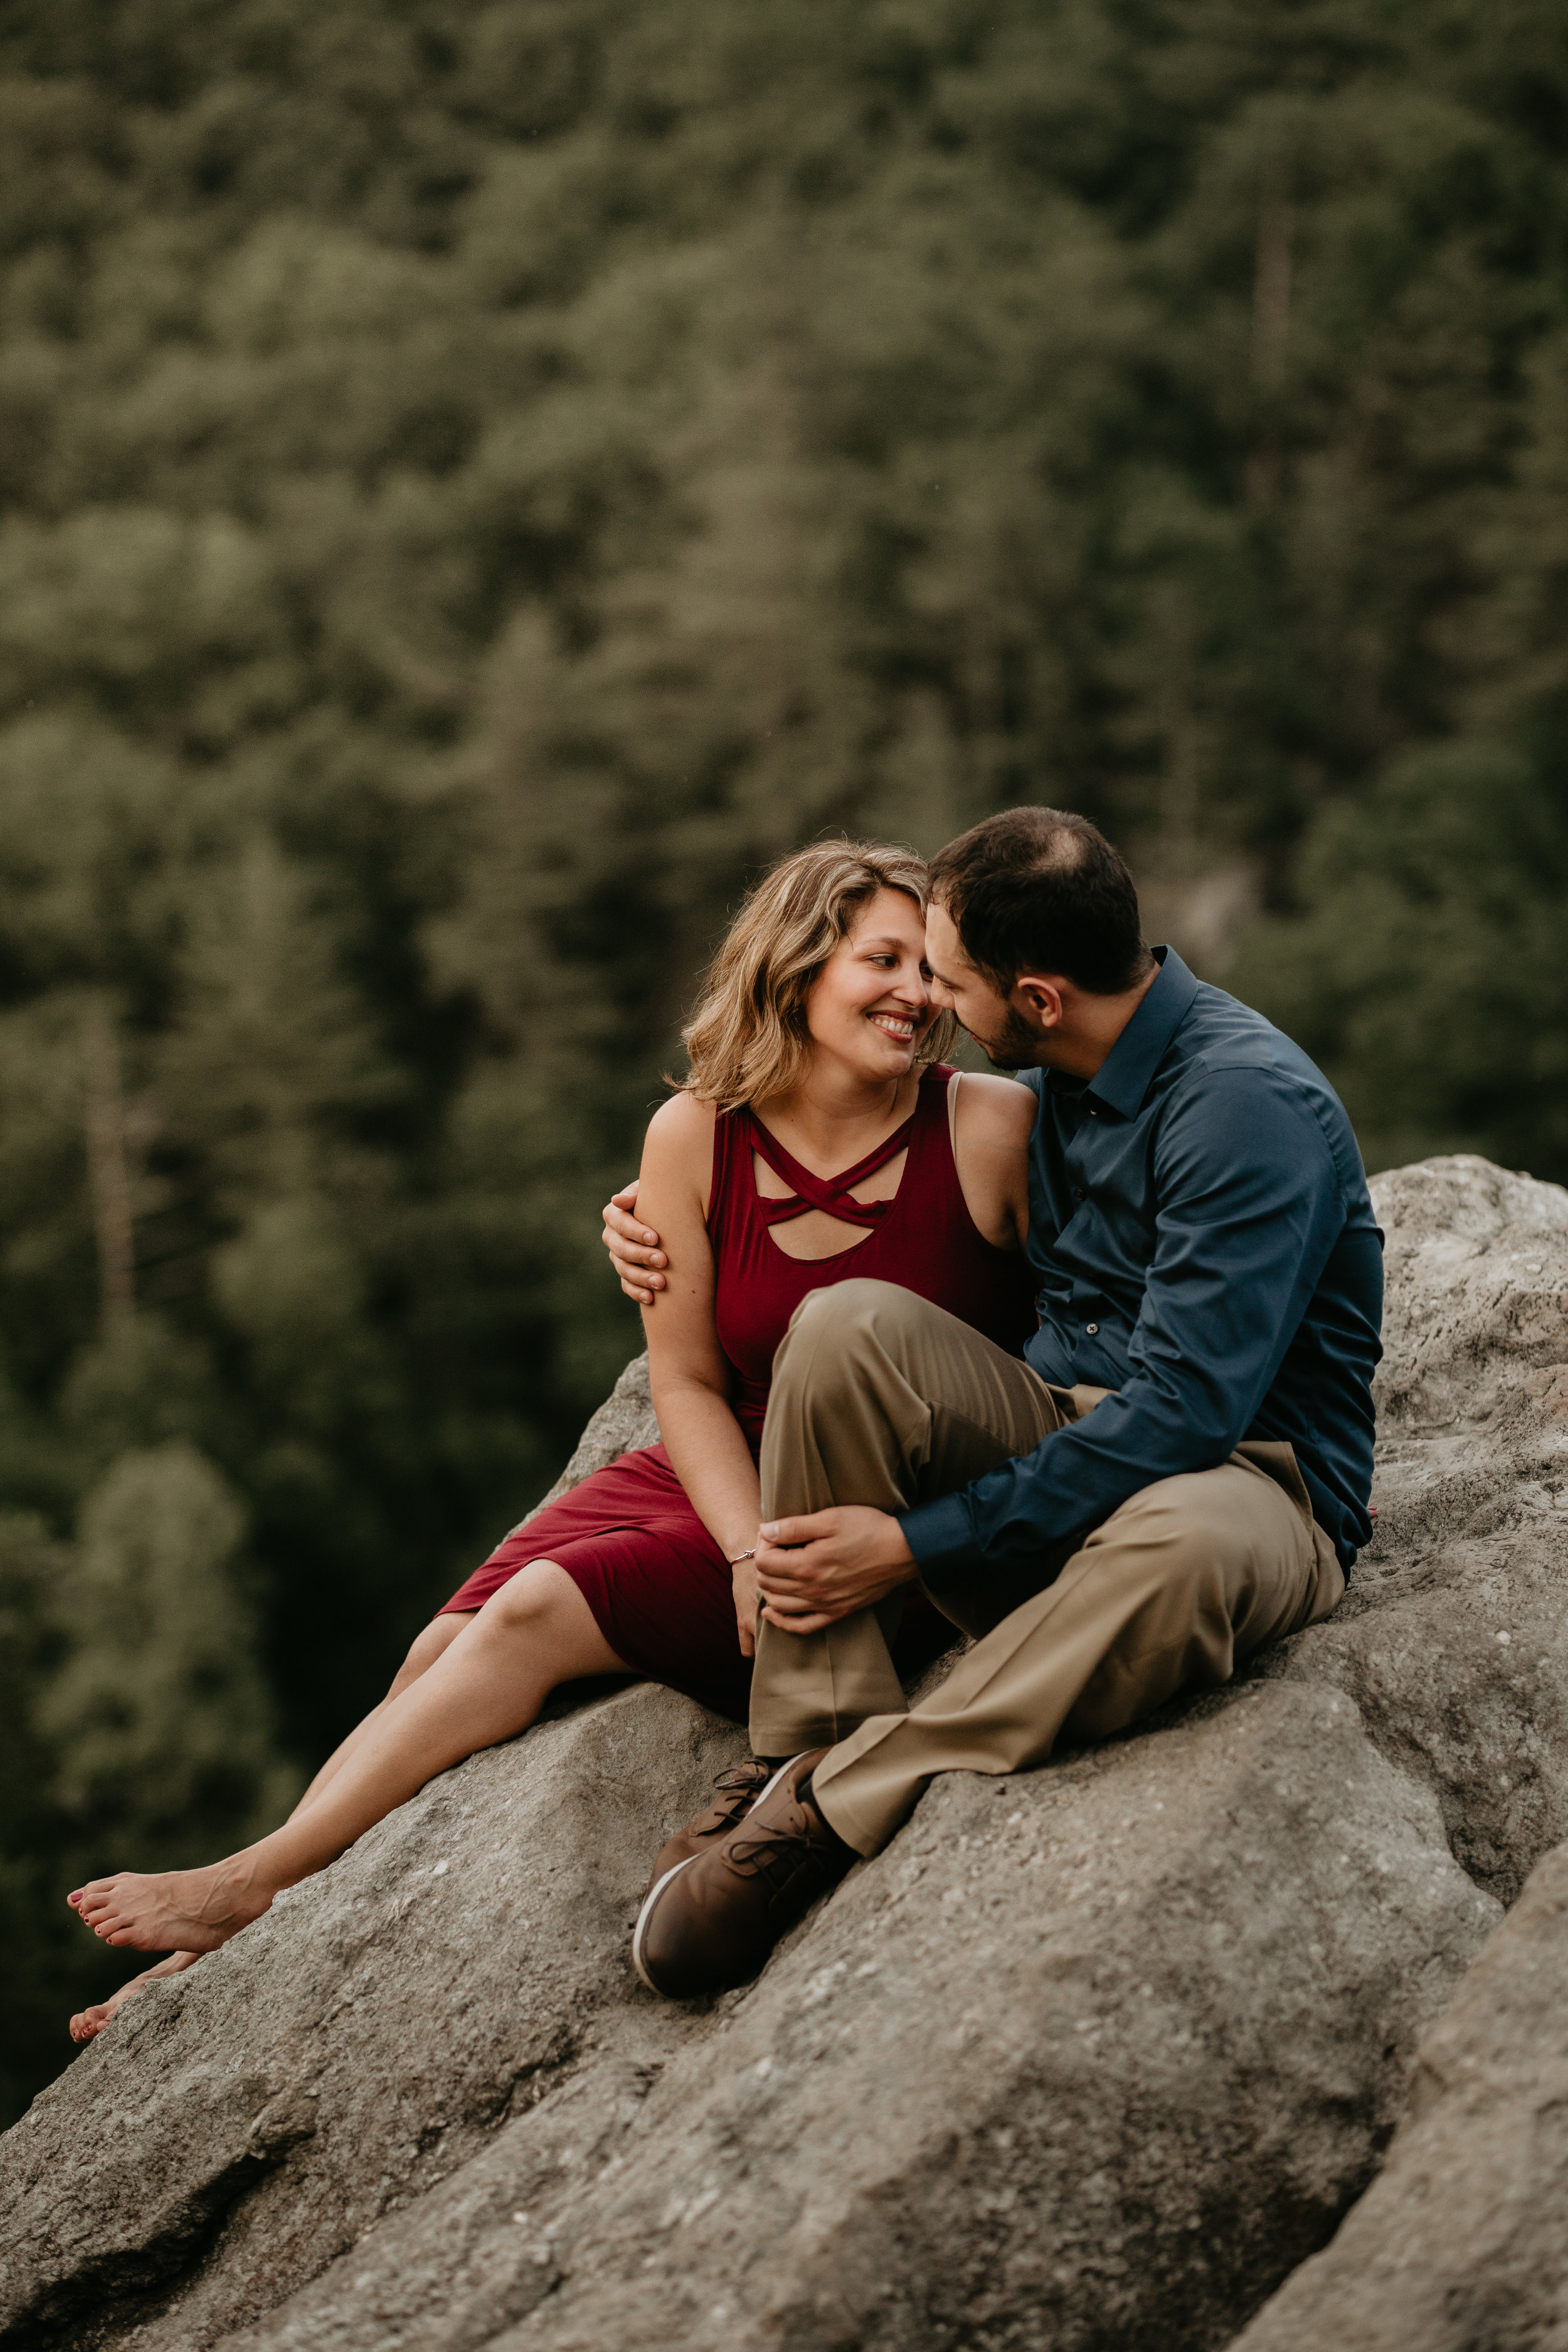 Nicole-Daacke-Photography-rock-state-park-overlook-king-queen-seat-maryland-hiking-adventure-engagement-session-photos-portraits-summer-bel-air-dog-engagement-session-35.jpg